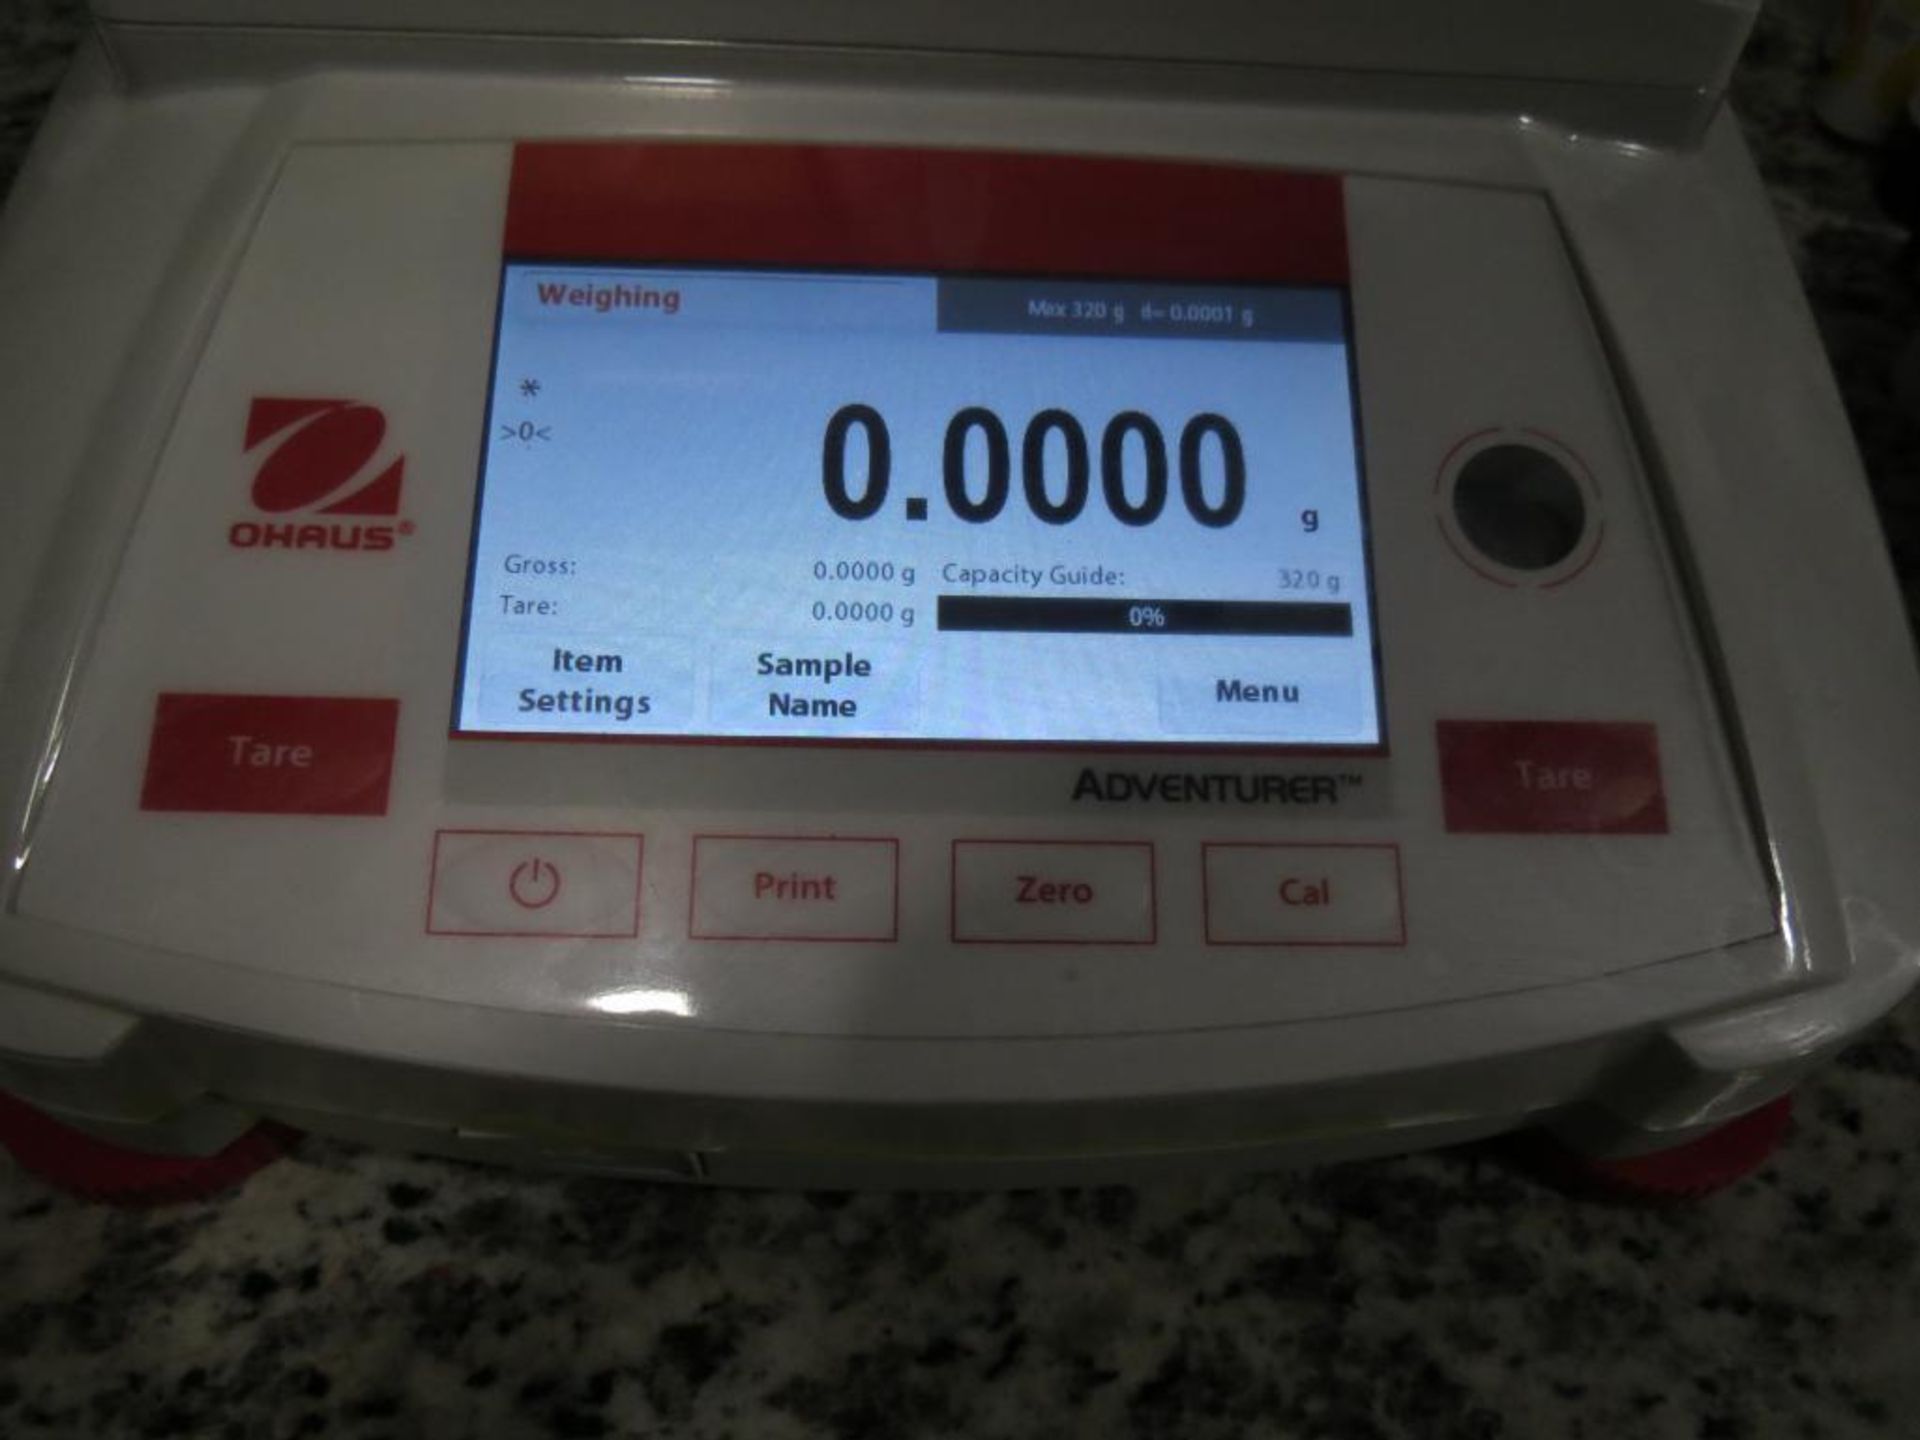 Ohaus Adventurer Analytical Balance Precision Lab Scale, 0.0001 to Max 320g - Image 2 of 2